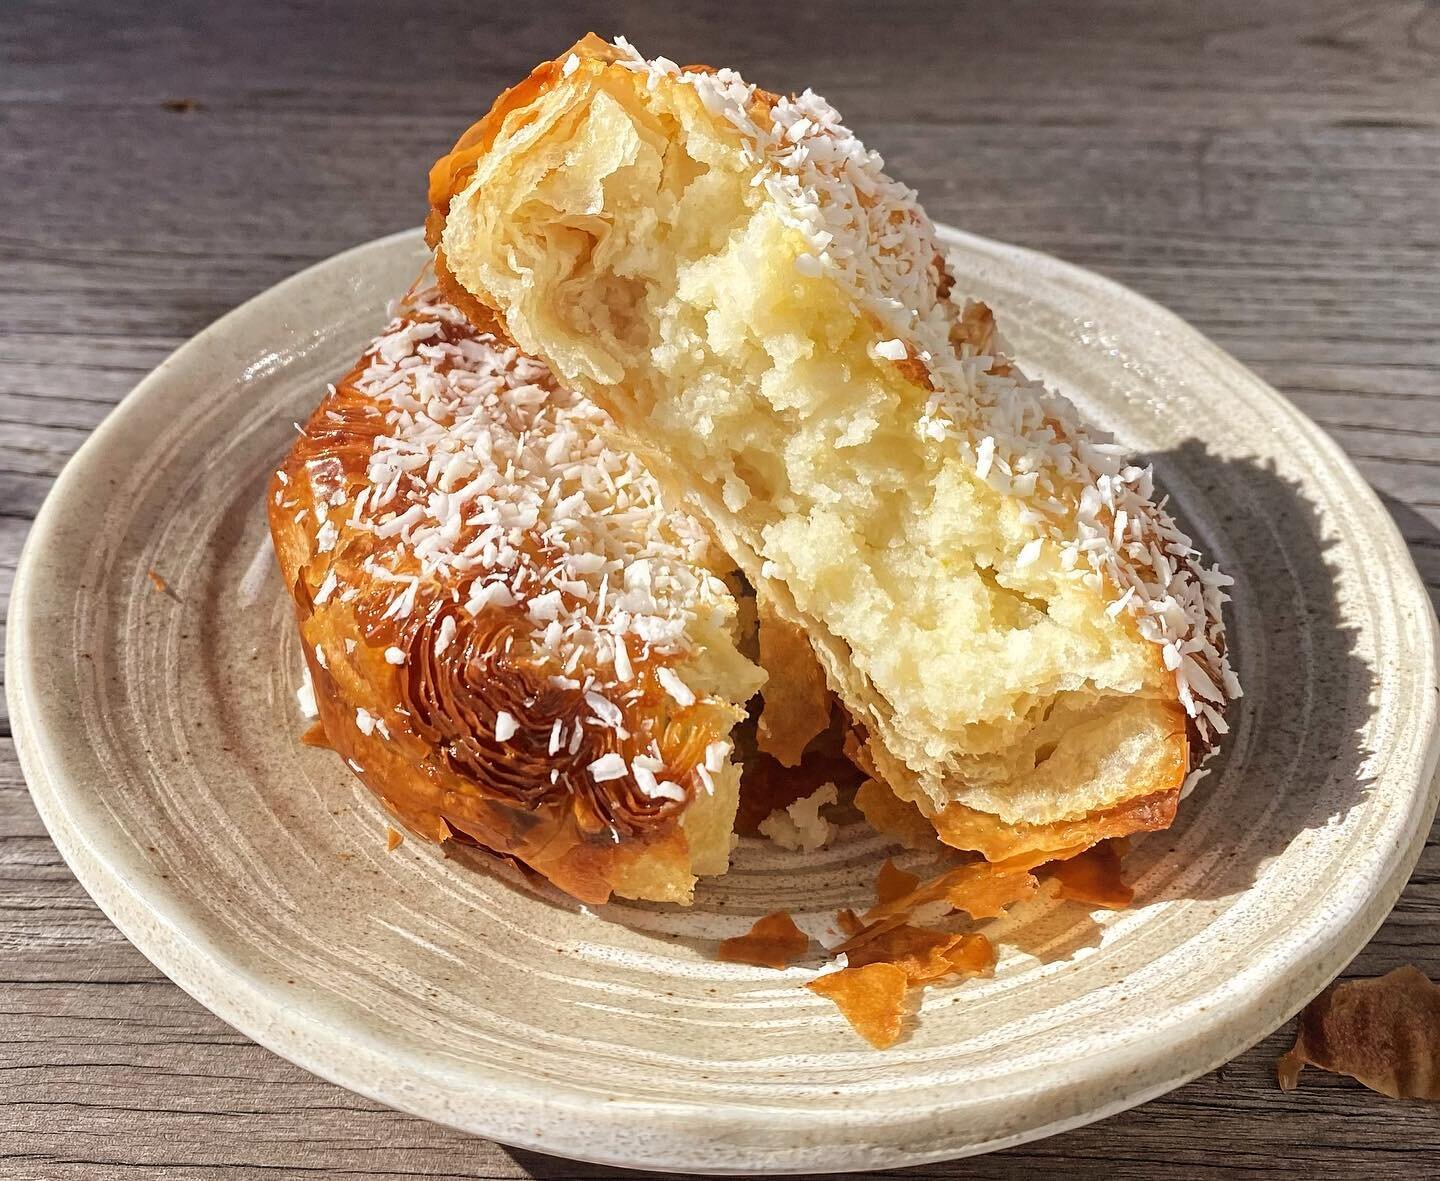 🌴🥥 Coconut Macaroon Danish tomorrow!
We hope you&rsquo;re just as excited for the long weekend as we are! Kicking off all the specials we have planned thru Monday with this one☝️. Tender, fragrant coconut macaroon filling in a crispy Danish tart, g